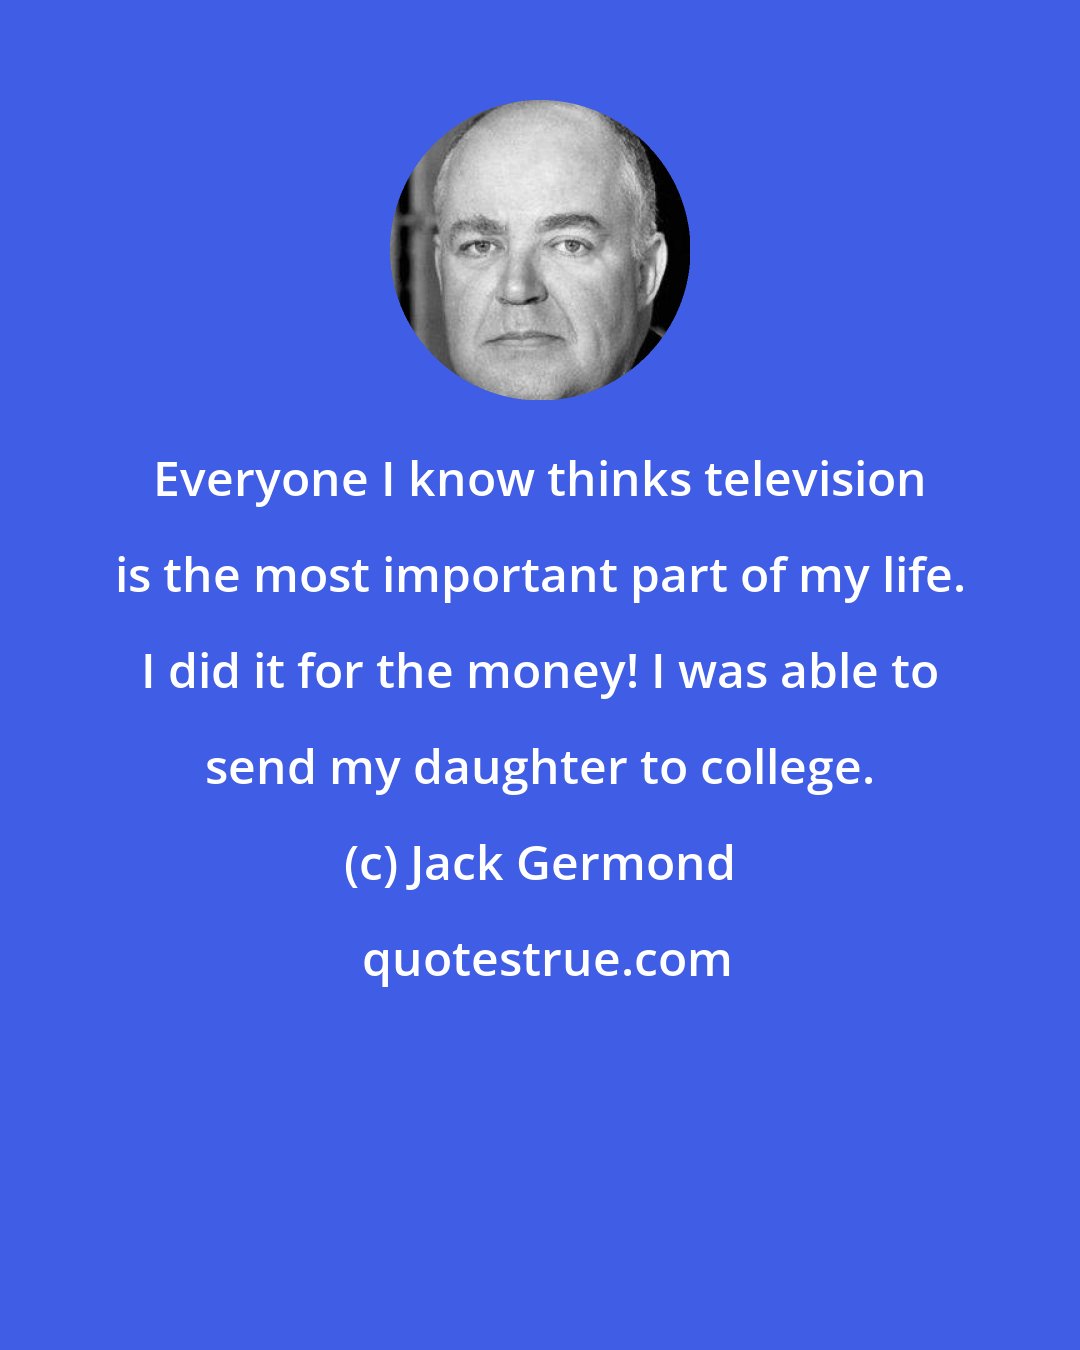 Jack Germond: Everyone I know thinks television is the most important part of my life. I did it for the money! I was able to send my daughter to college.